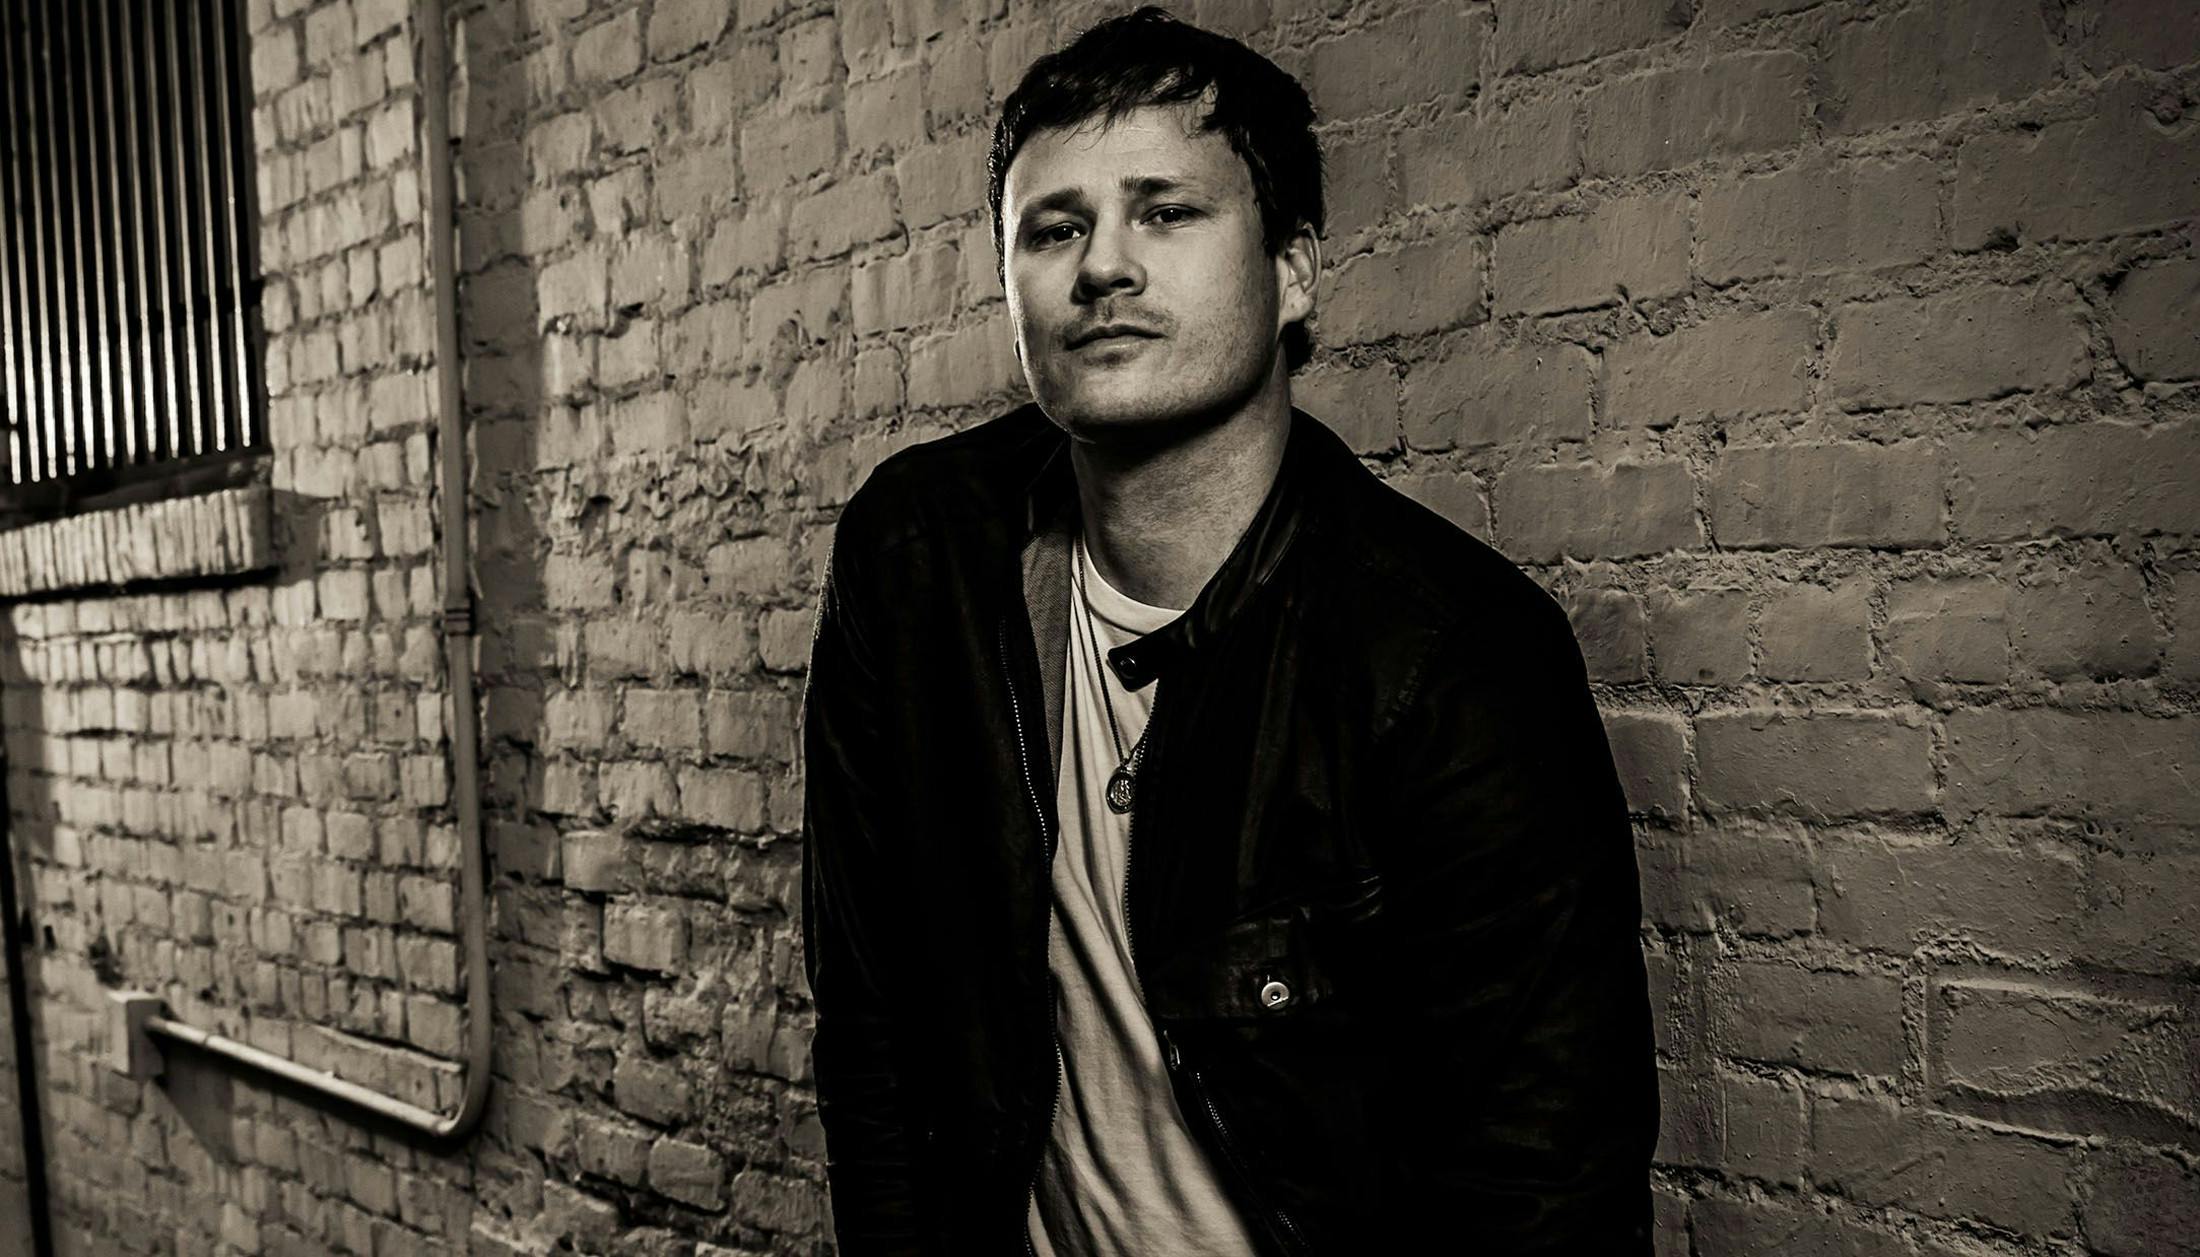 Tom DeLonge Used To Hunt For Bigfoot While On Tour With blink-182